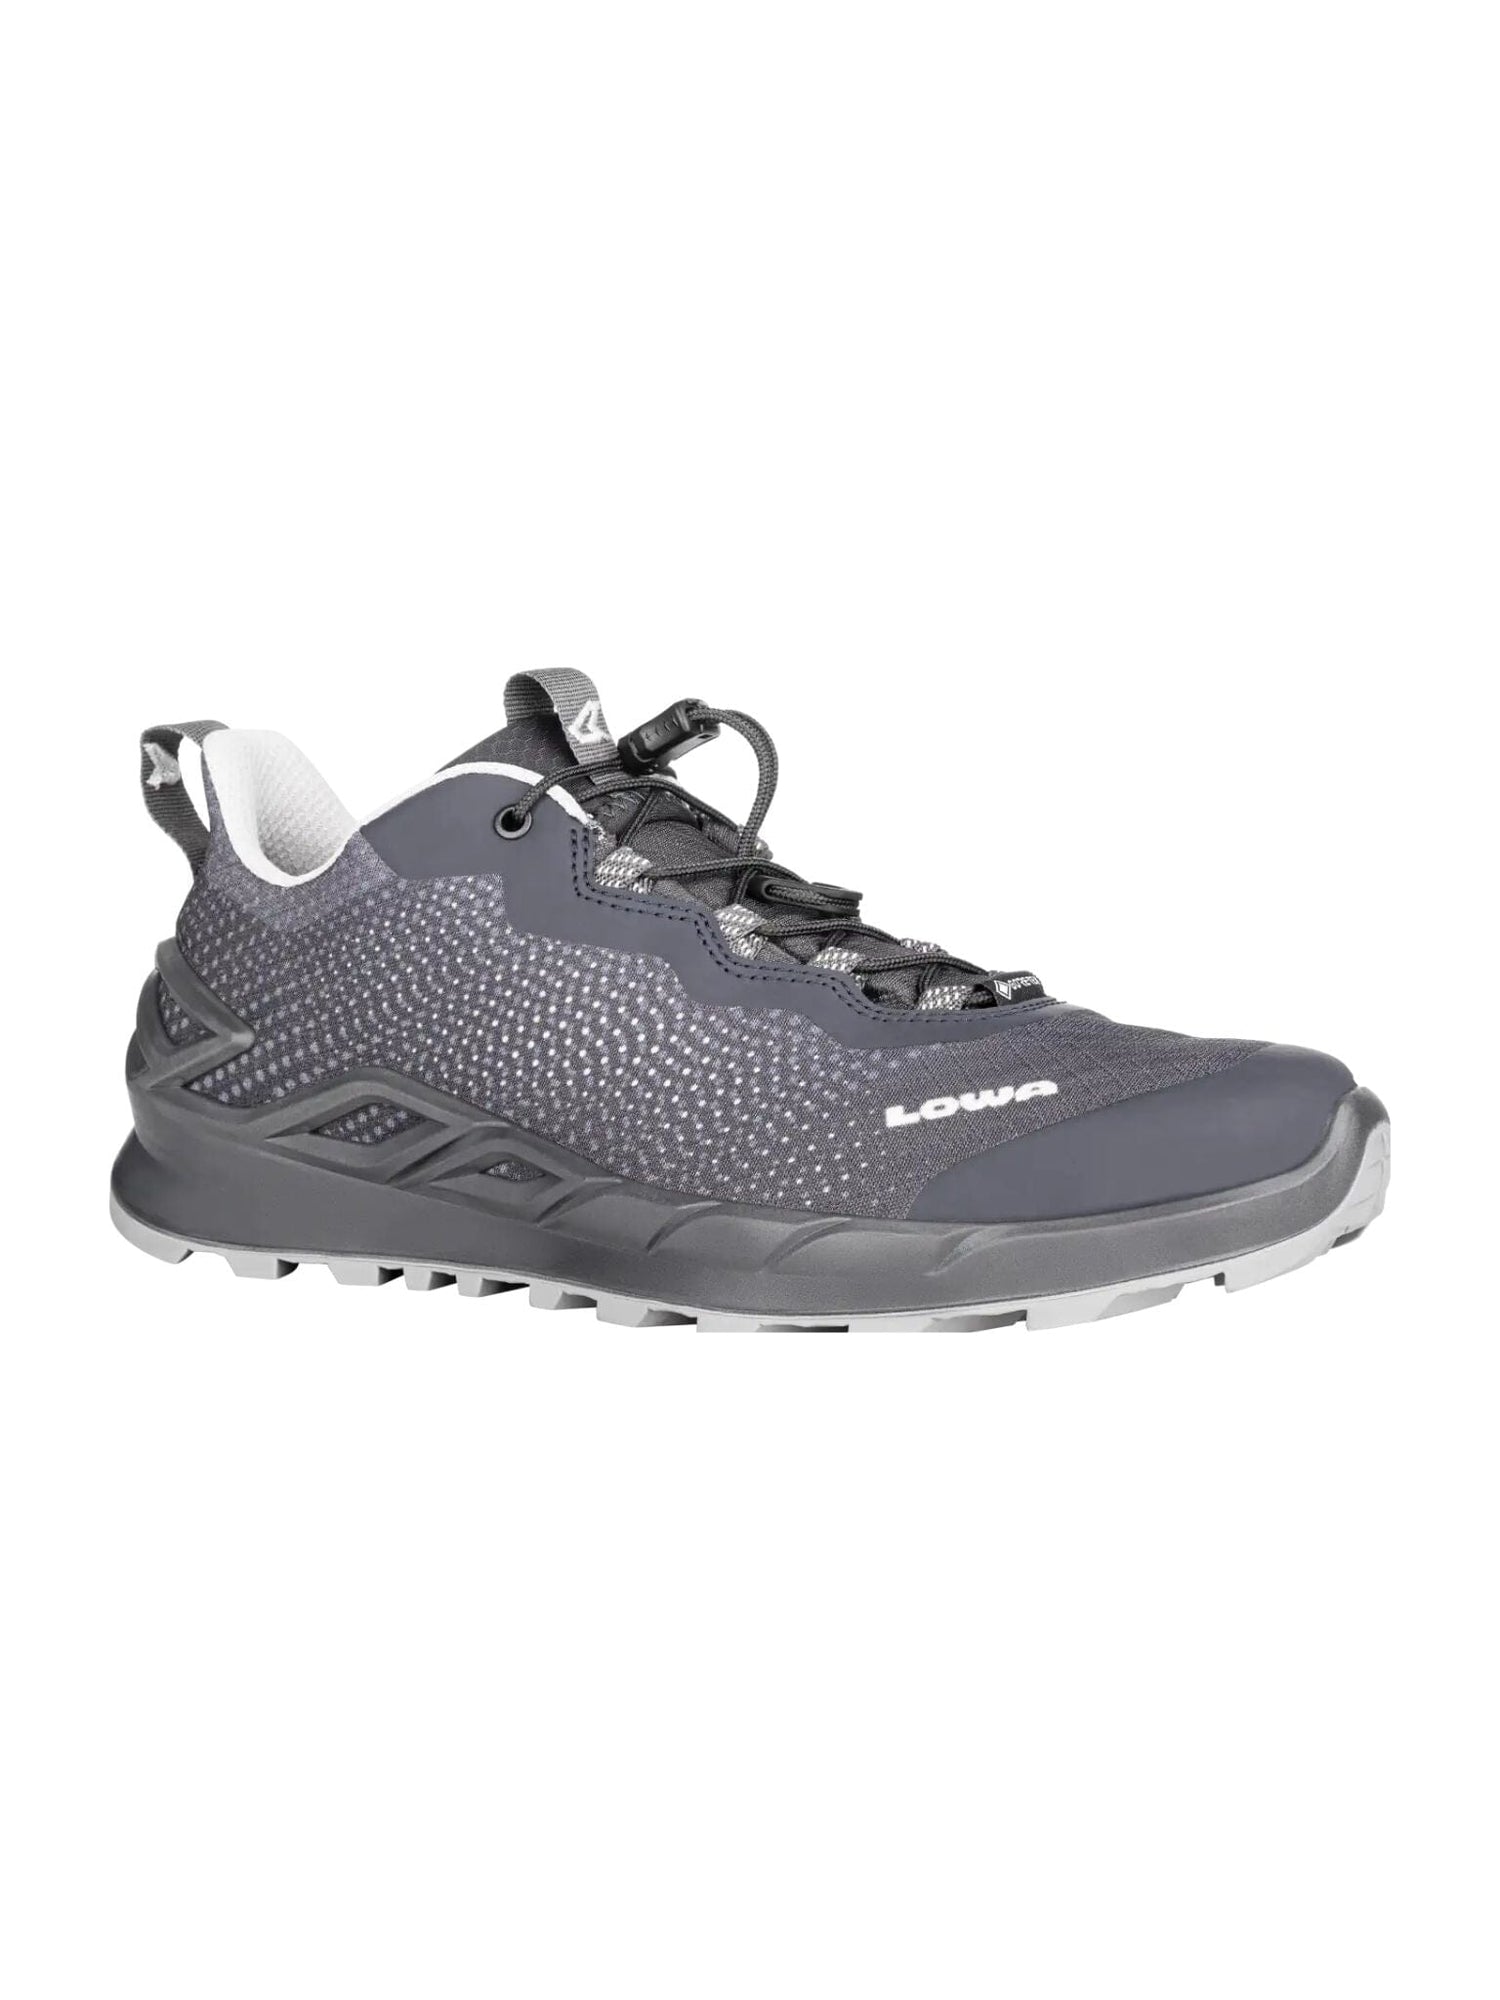 LOWA W's Merger GTX Lo - Low GORE-TEX shoes Anthracite / Lavender Shoes